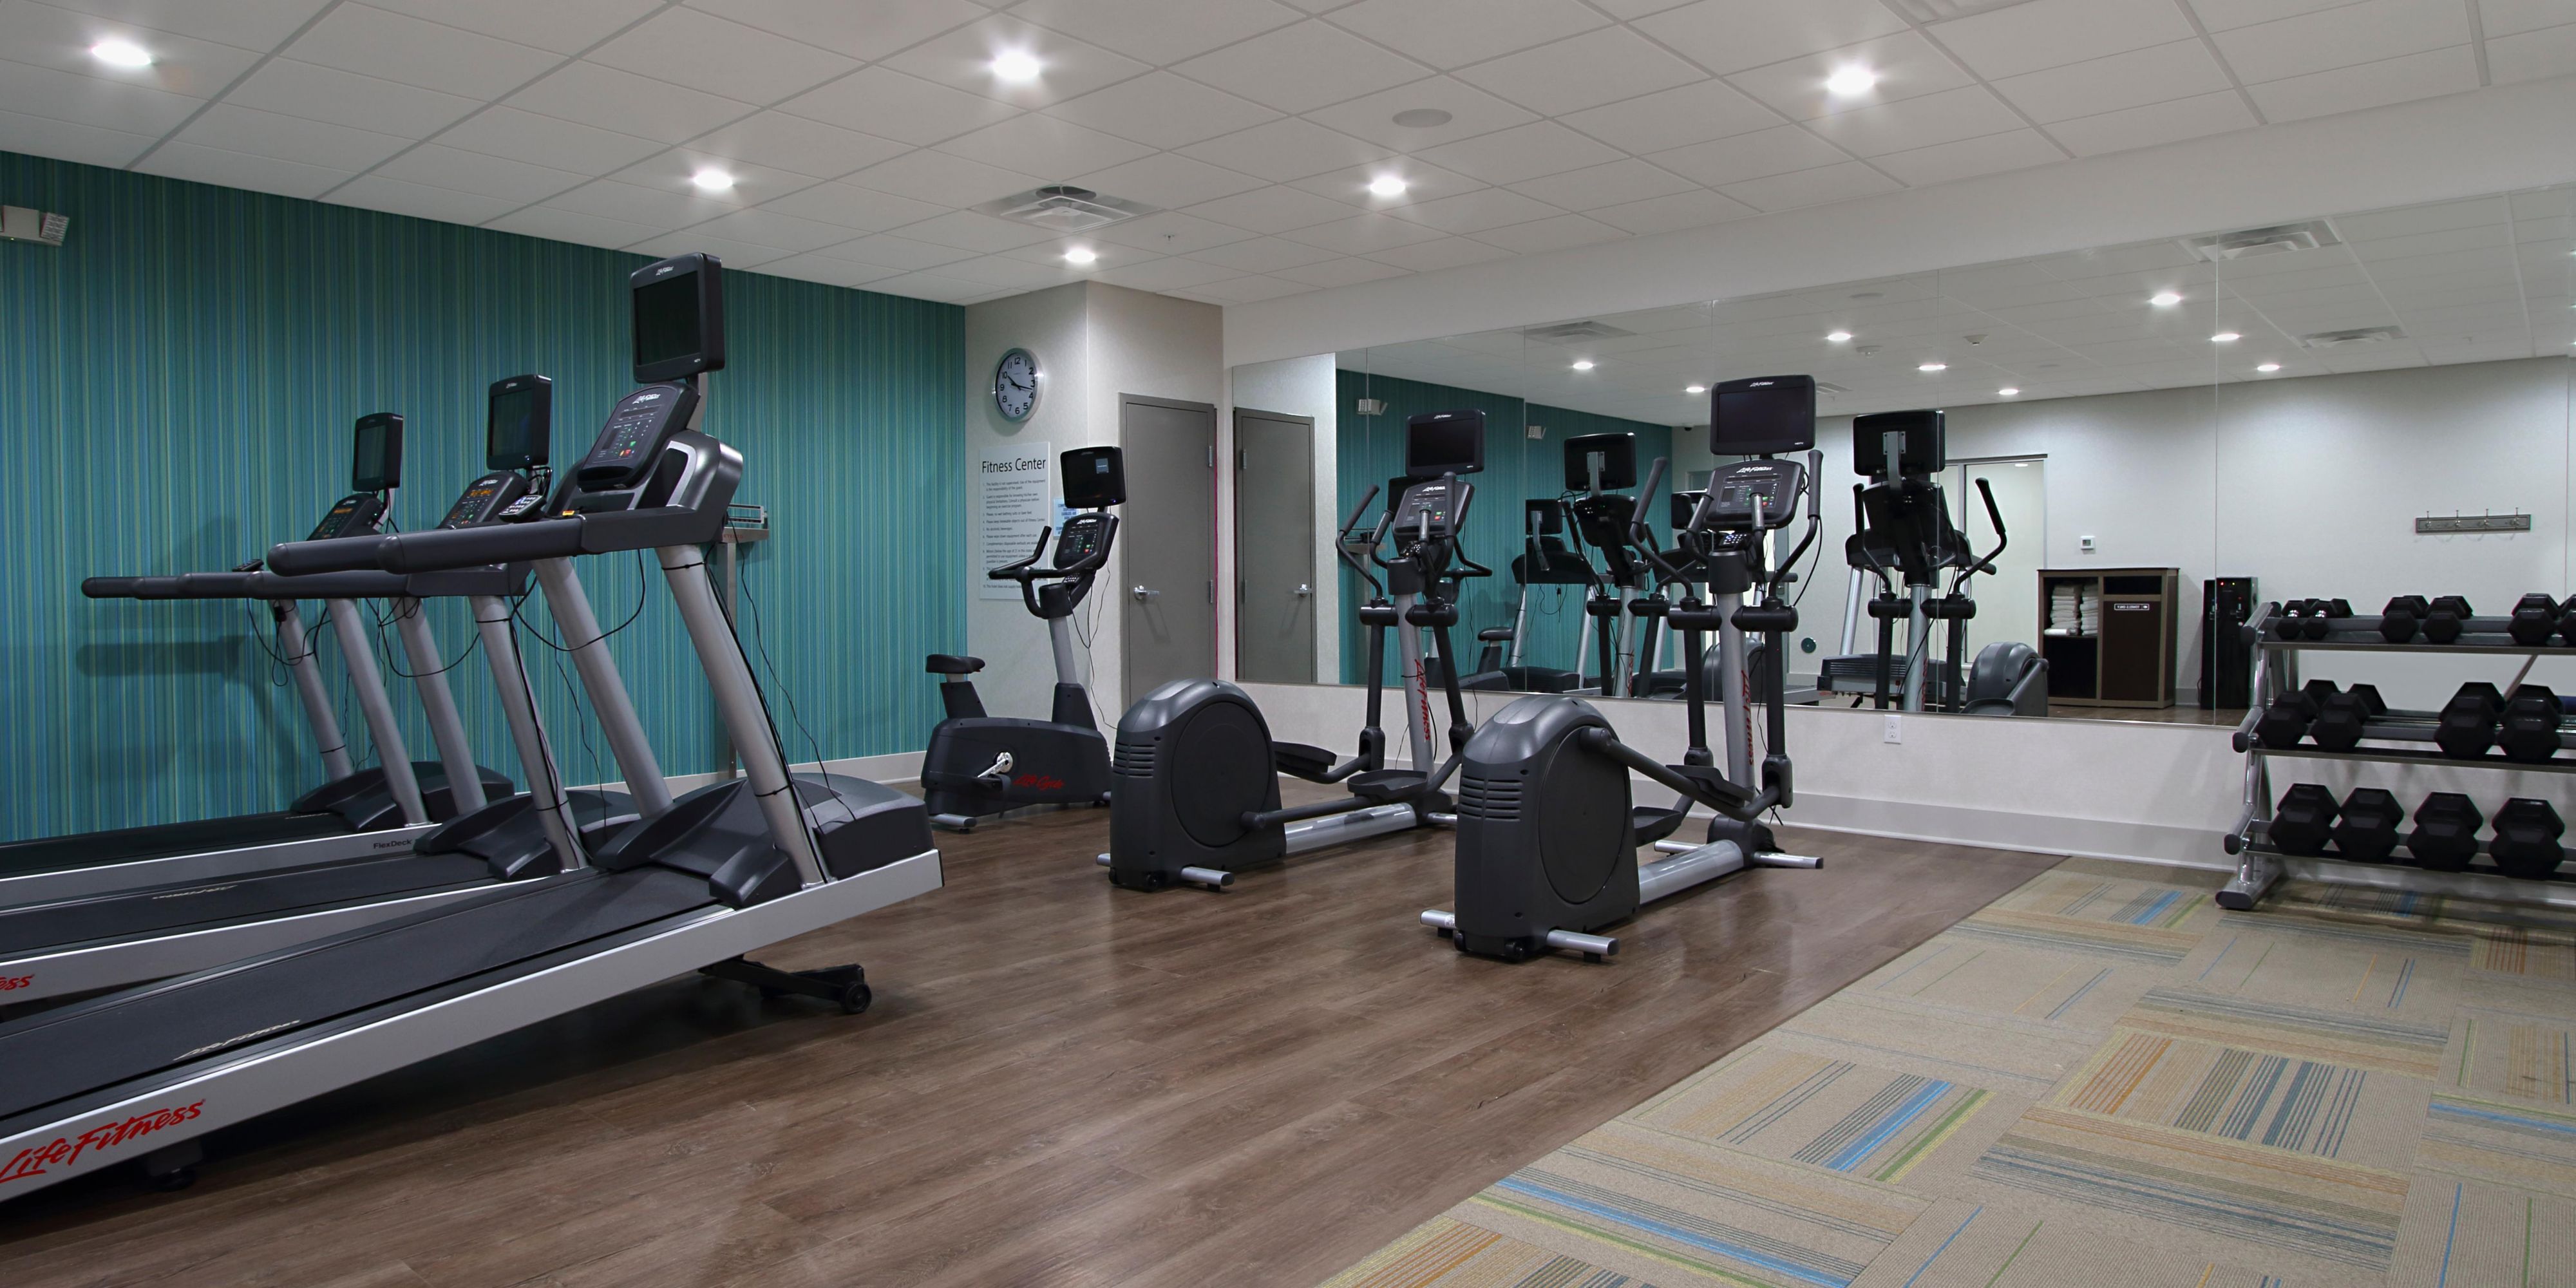 Need a work out while staying with us? Check out our state of the art exercise facility. Cardio? Weights? We have it all.